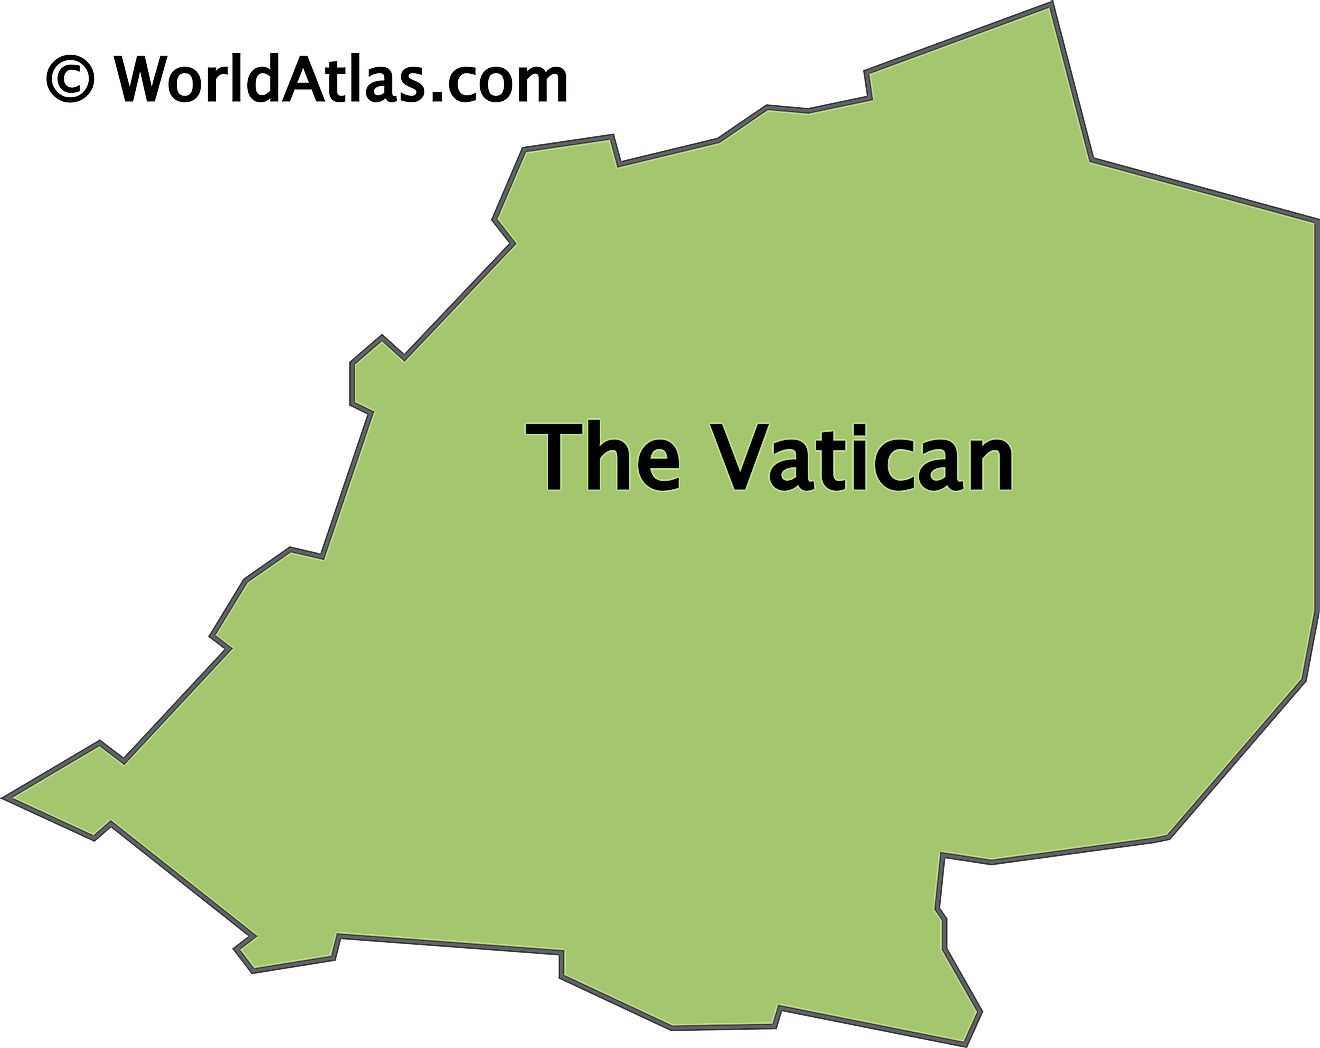 Outline Map of Vatican City